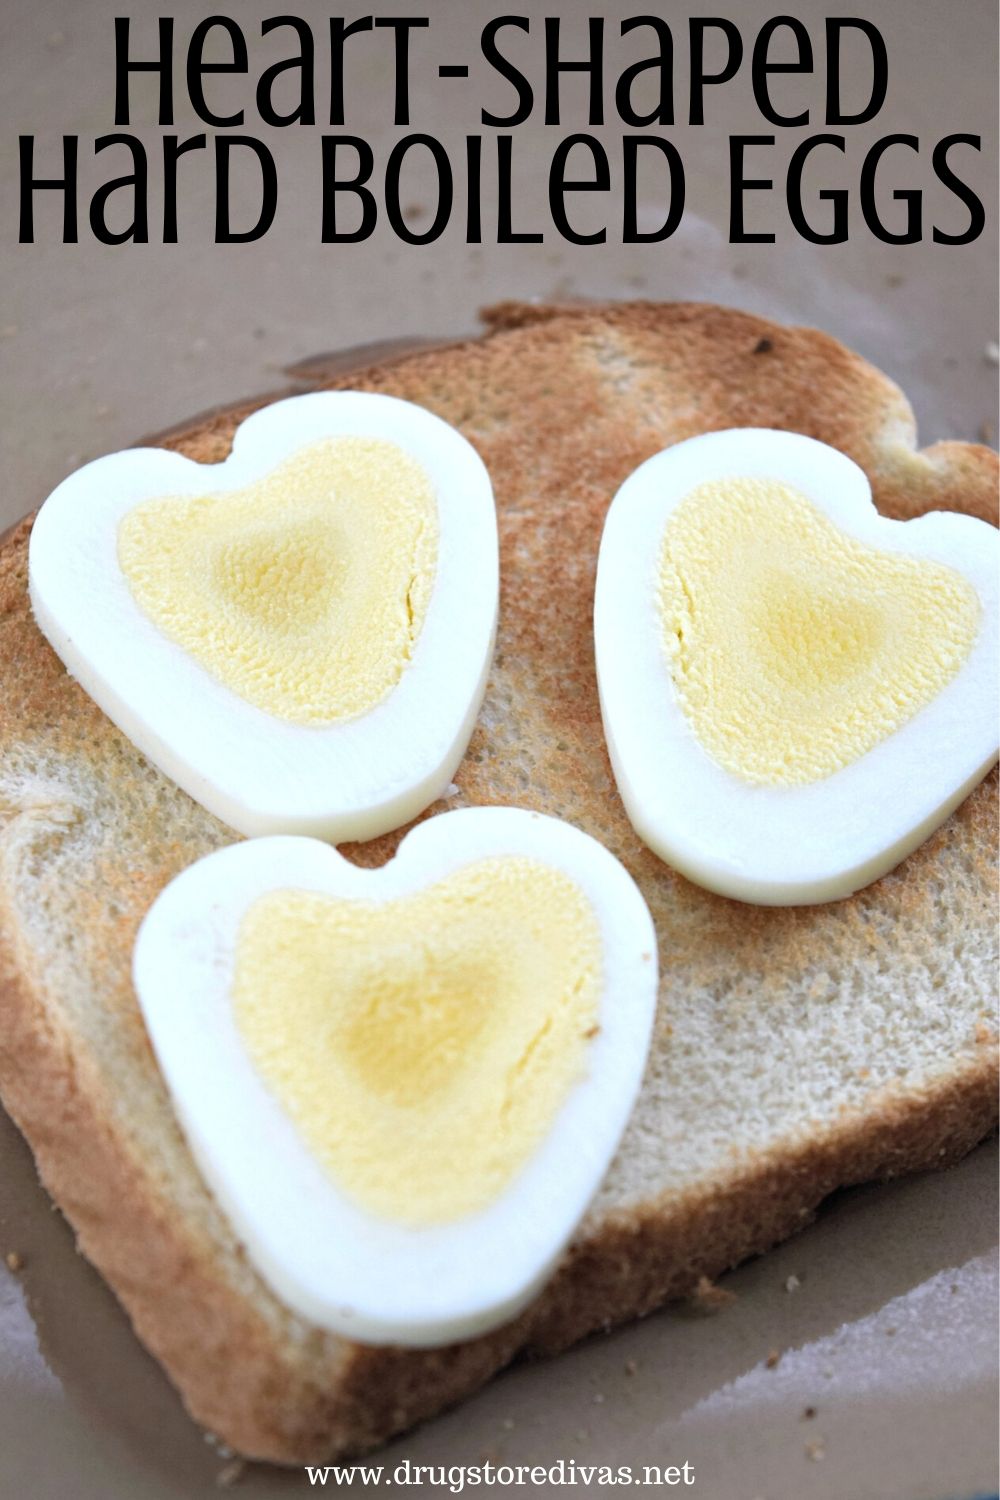 Heart-shaped hard boiled eggs on a piece of toast with the words "Heart-Shaped Hard Boiled Eggs" digitally written on top.